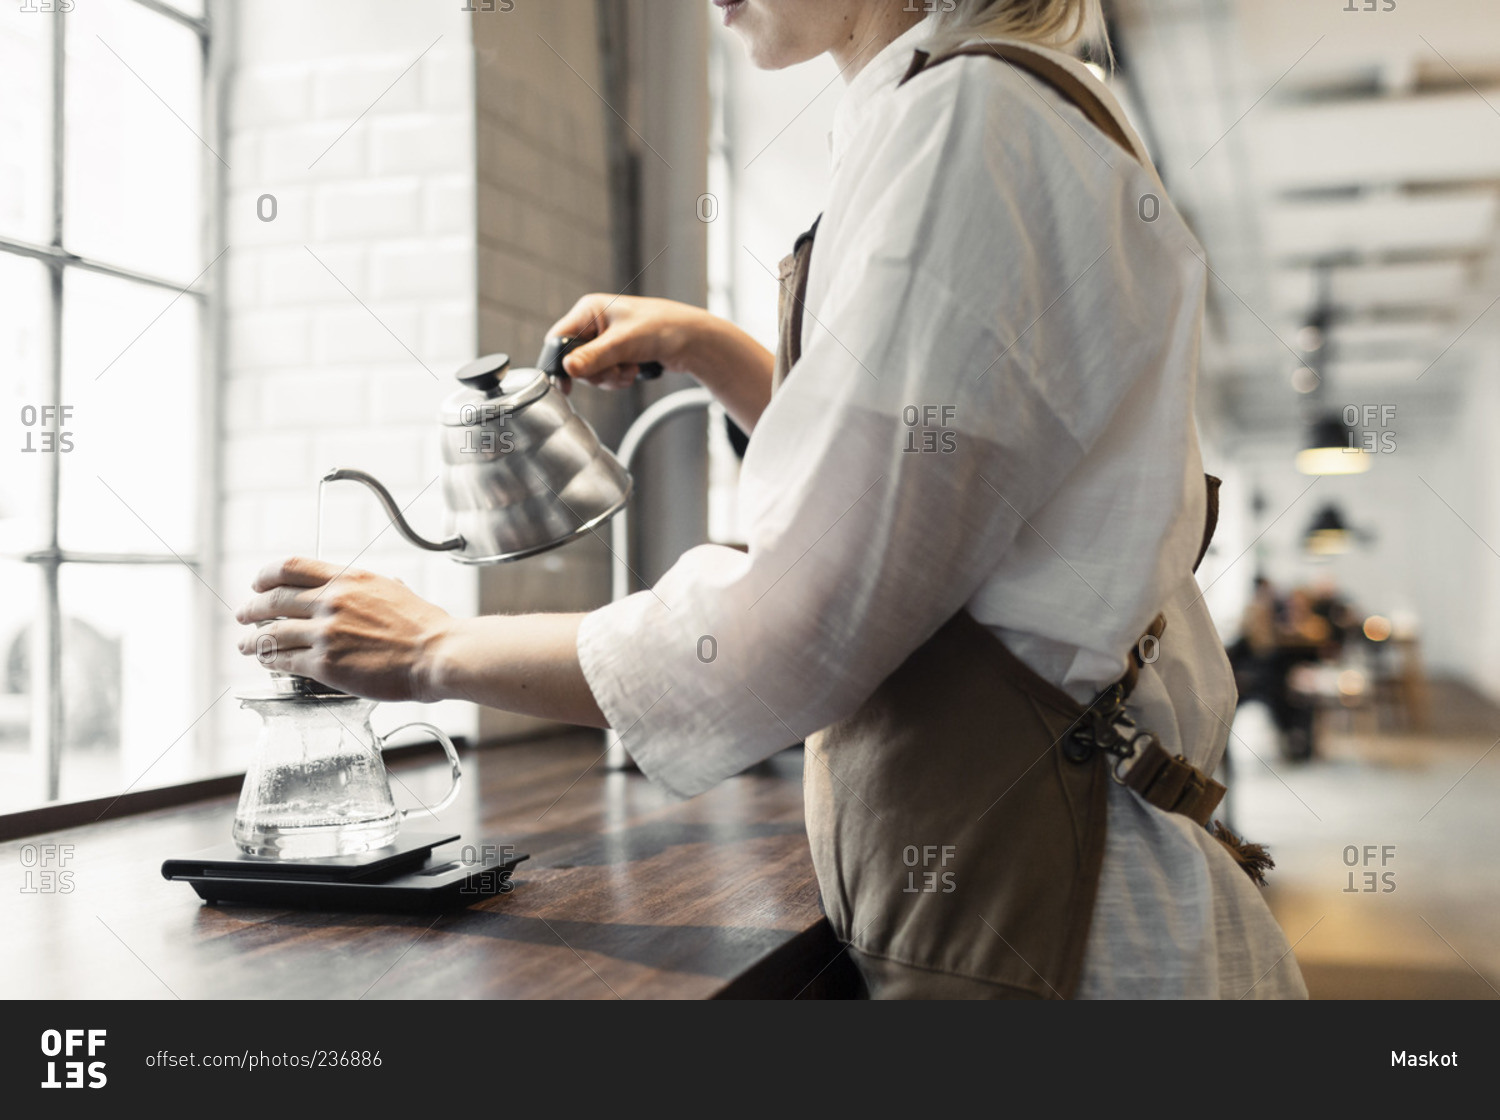 Female barista pouring boiling water in coffee filter at cafe counter